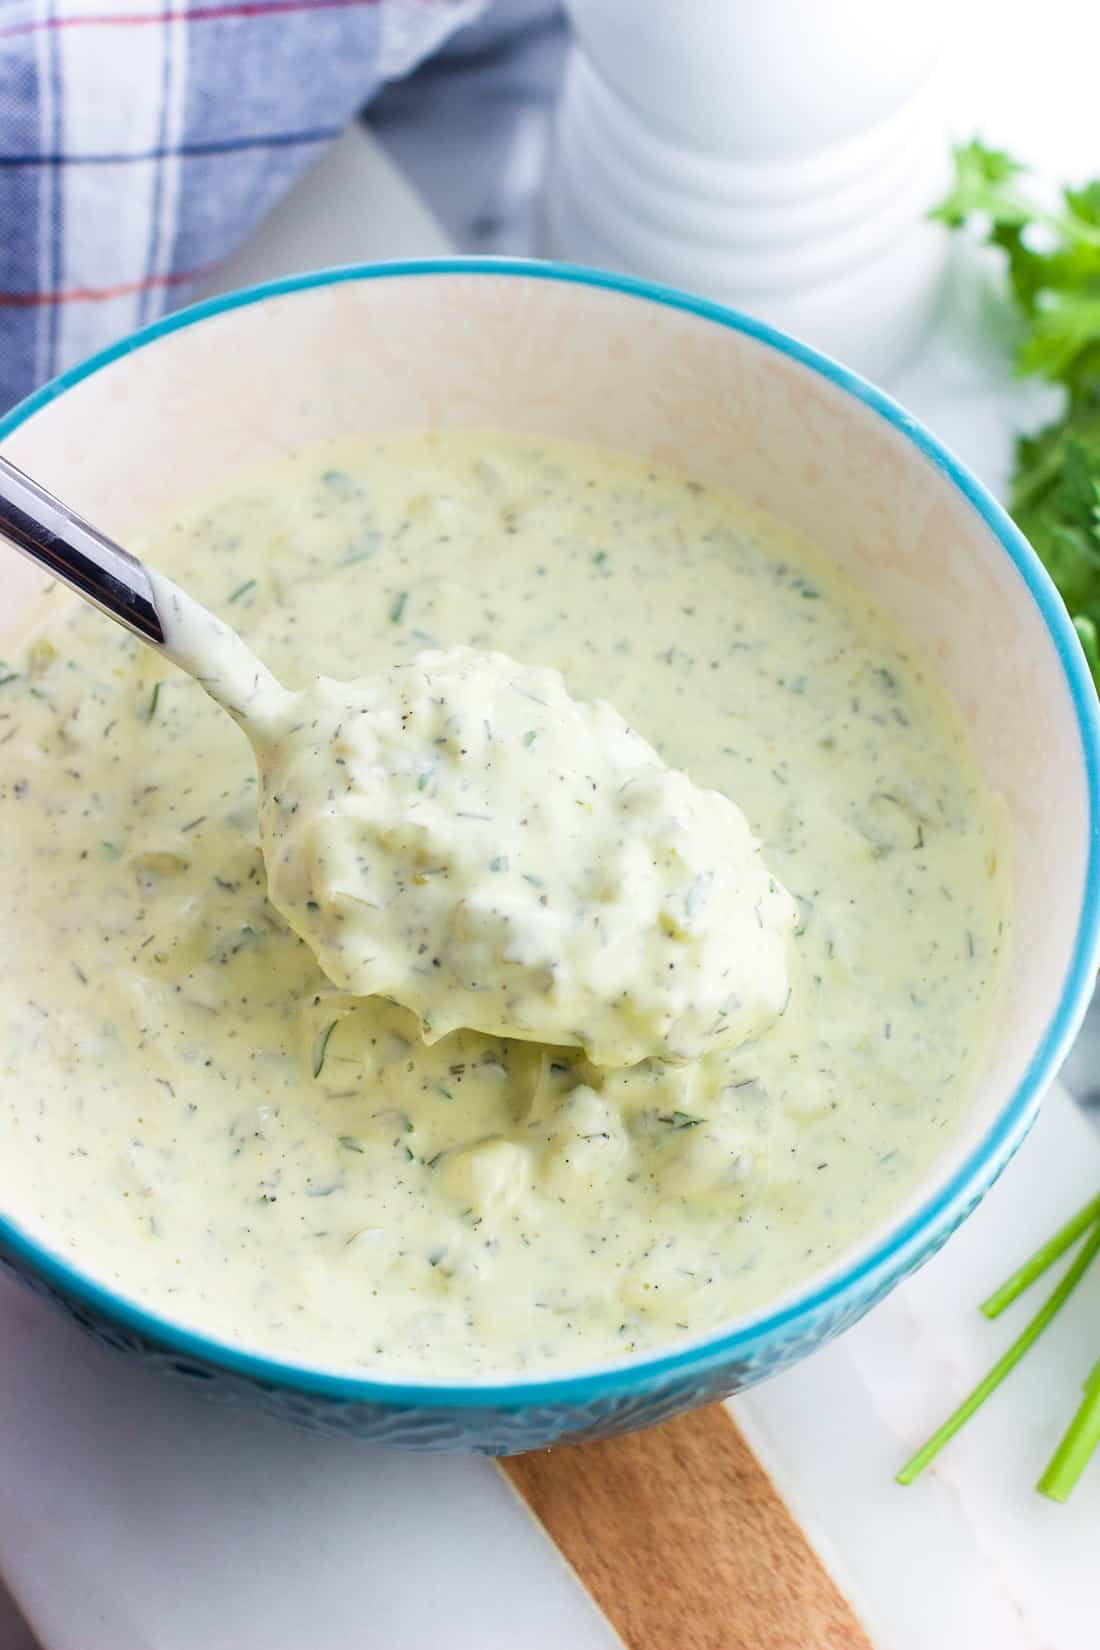 A spoon full of tartar sauce over a serving bowl.